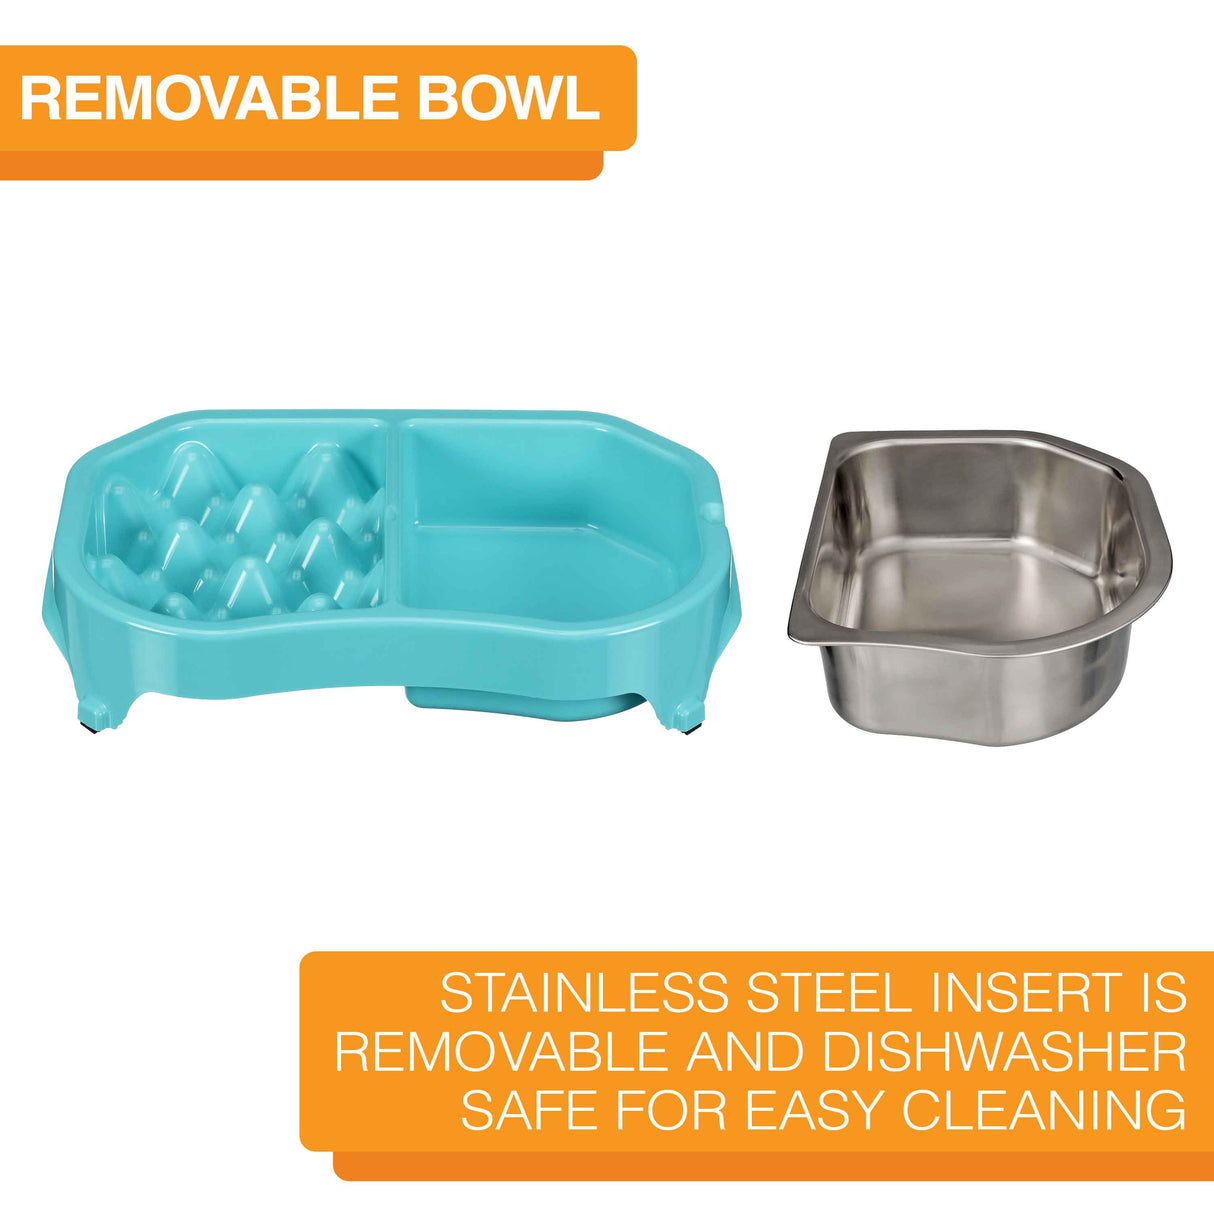 Elevated Dog Bowls for Large Dog,Raised Dog Bowls, Adjustable to 8  Heights(2.75 up to 20''),for Large,X/XL Large,Medium, Sized Dogs with 2  Stainless